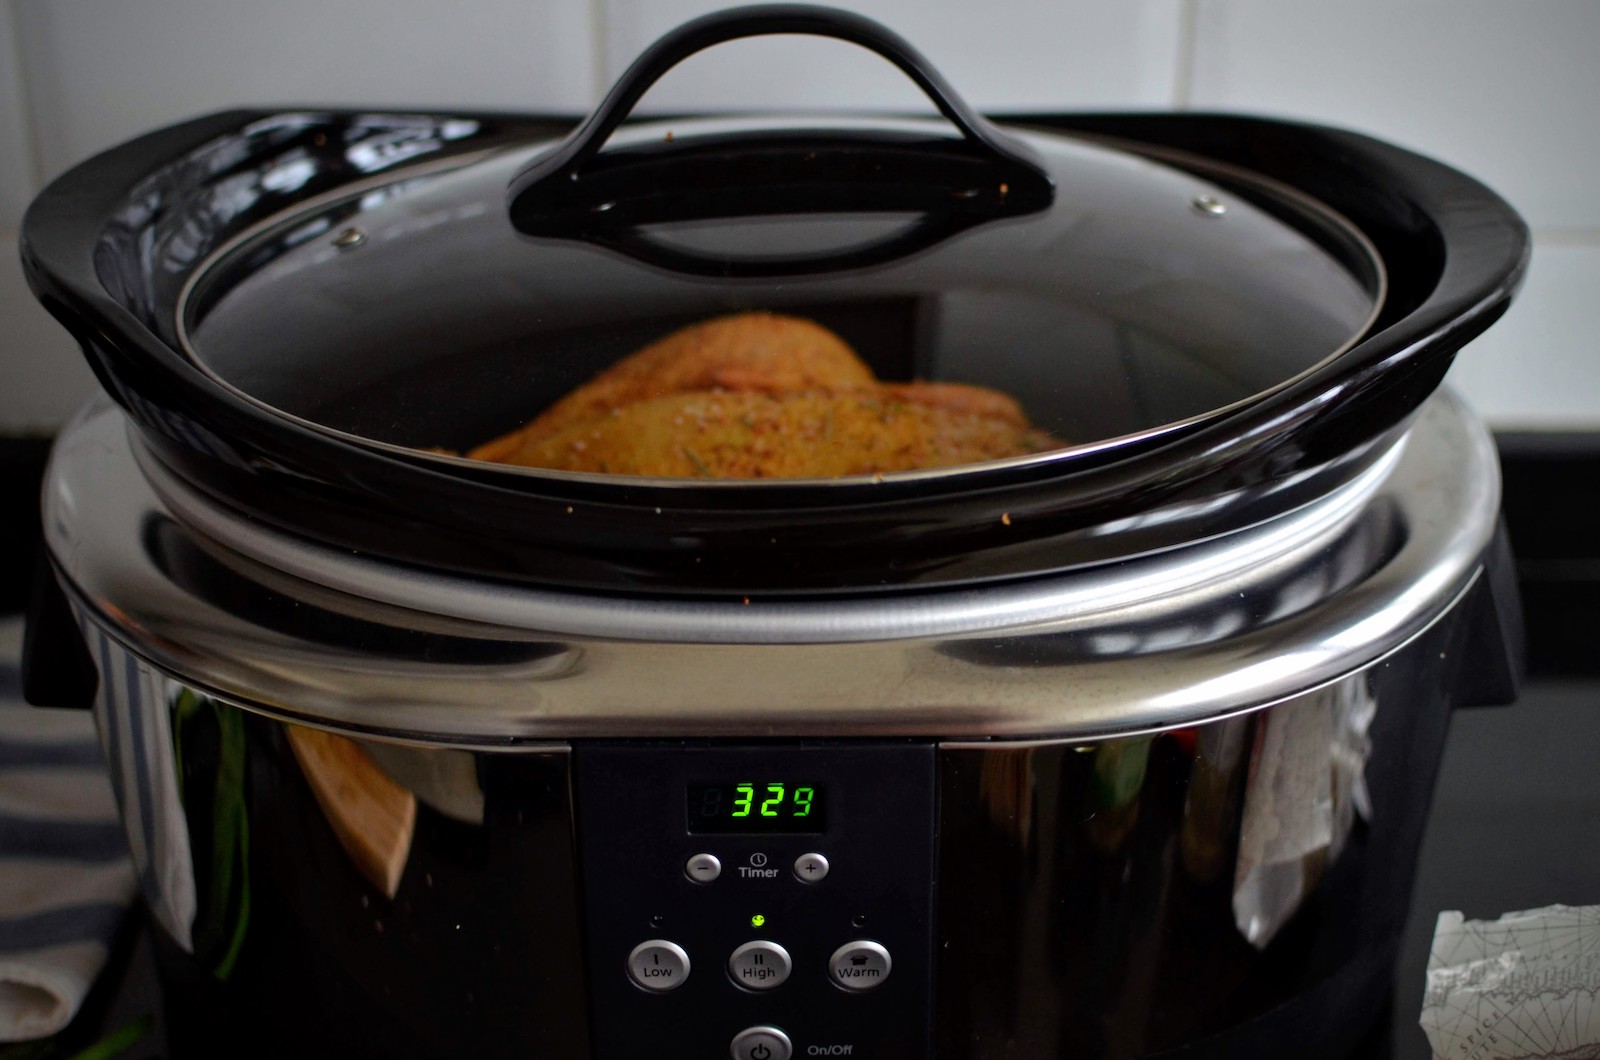 Time set to cook chicken in Crock-Pot